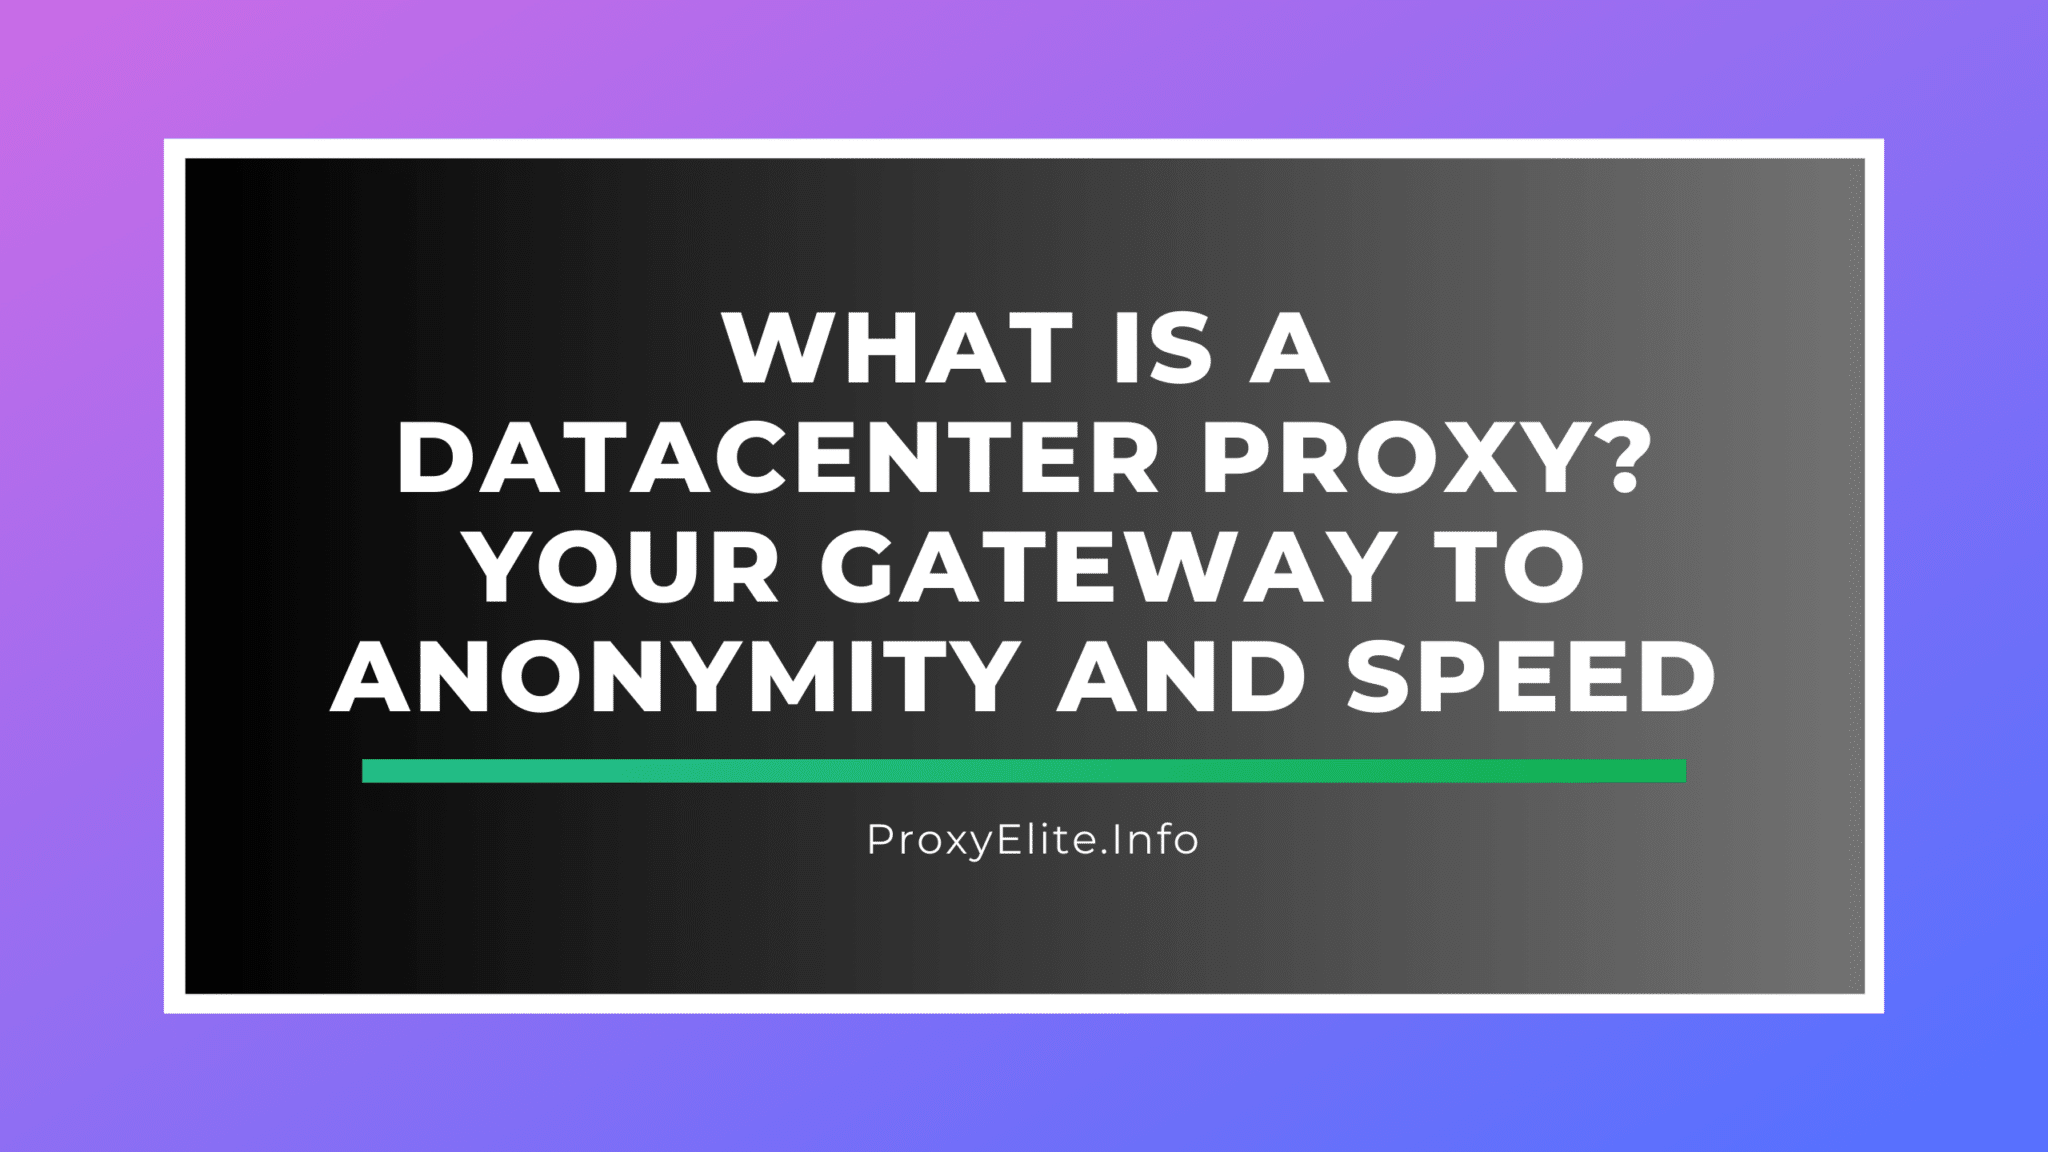 What is a datacenter proxy? Your Gateway to Anonymity and Speed